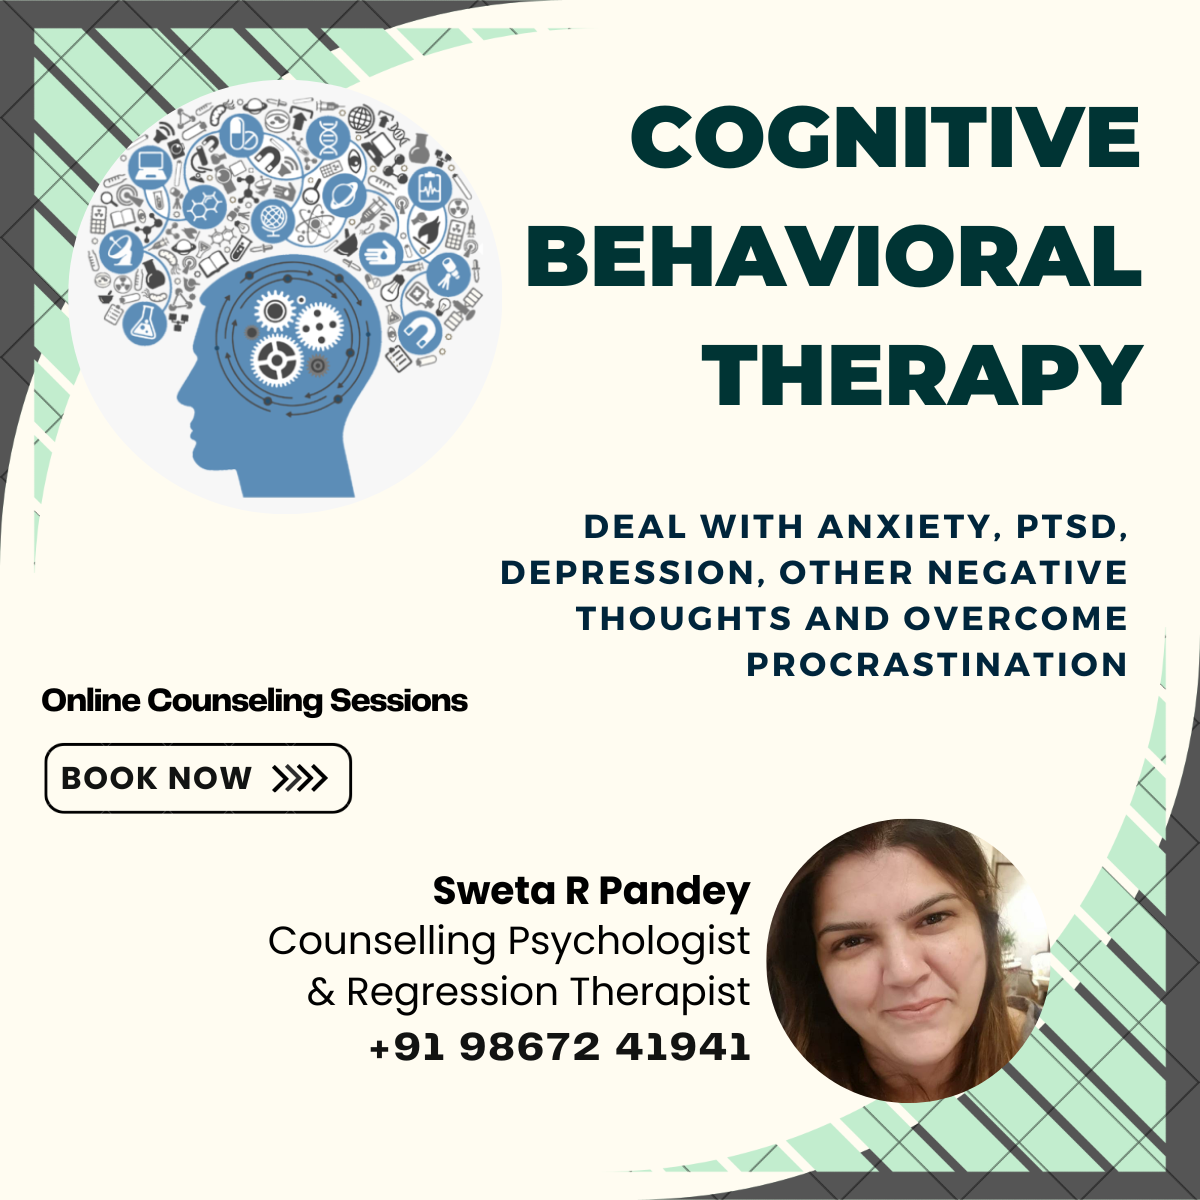 Sweta R Pandey - Cognitive Behavioral Therapy - Mangalore